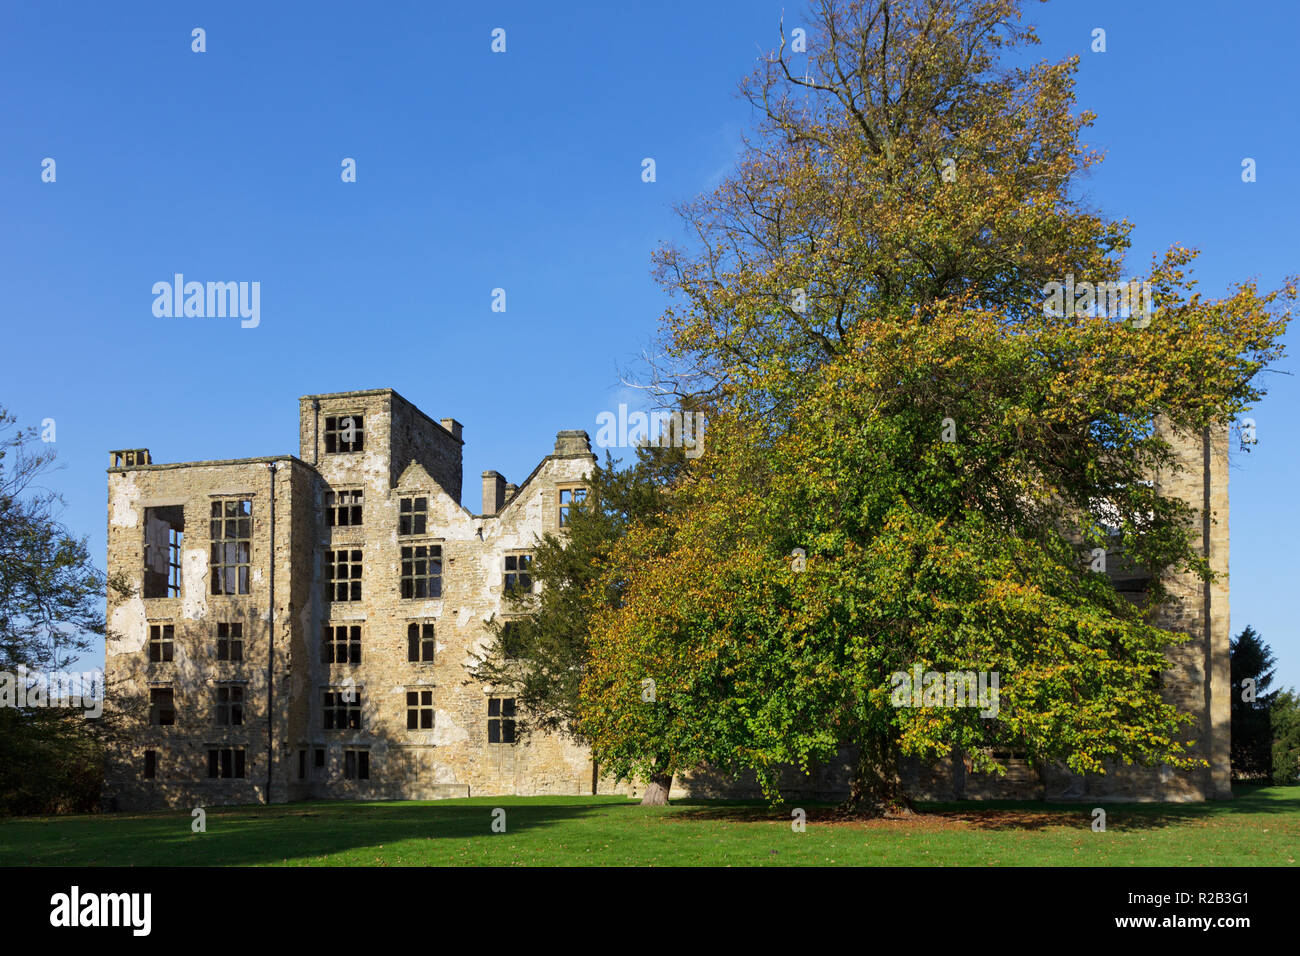 Hardwick Old Hall,16th century manor ruins in the grounds of Hardwick Hall Stock Photo